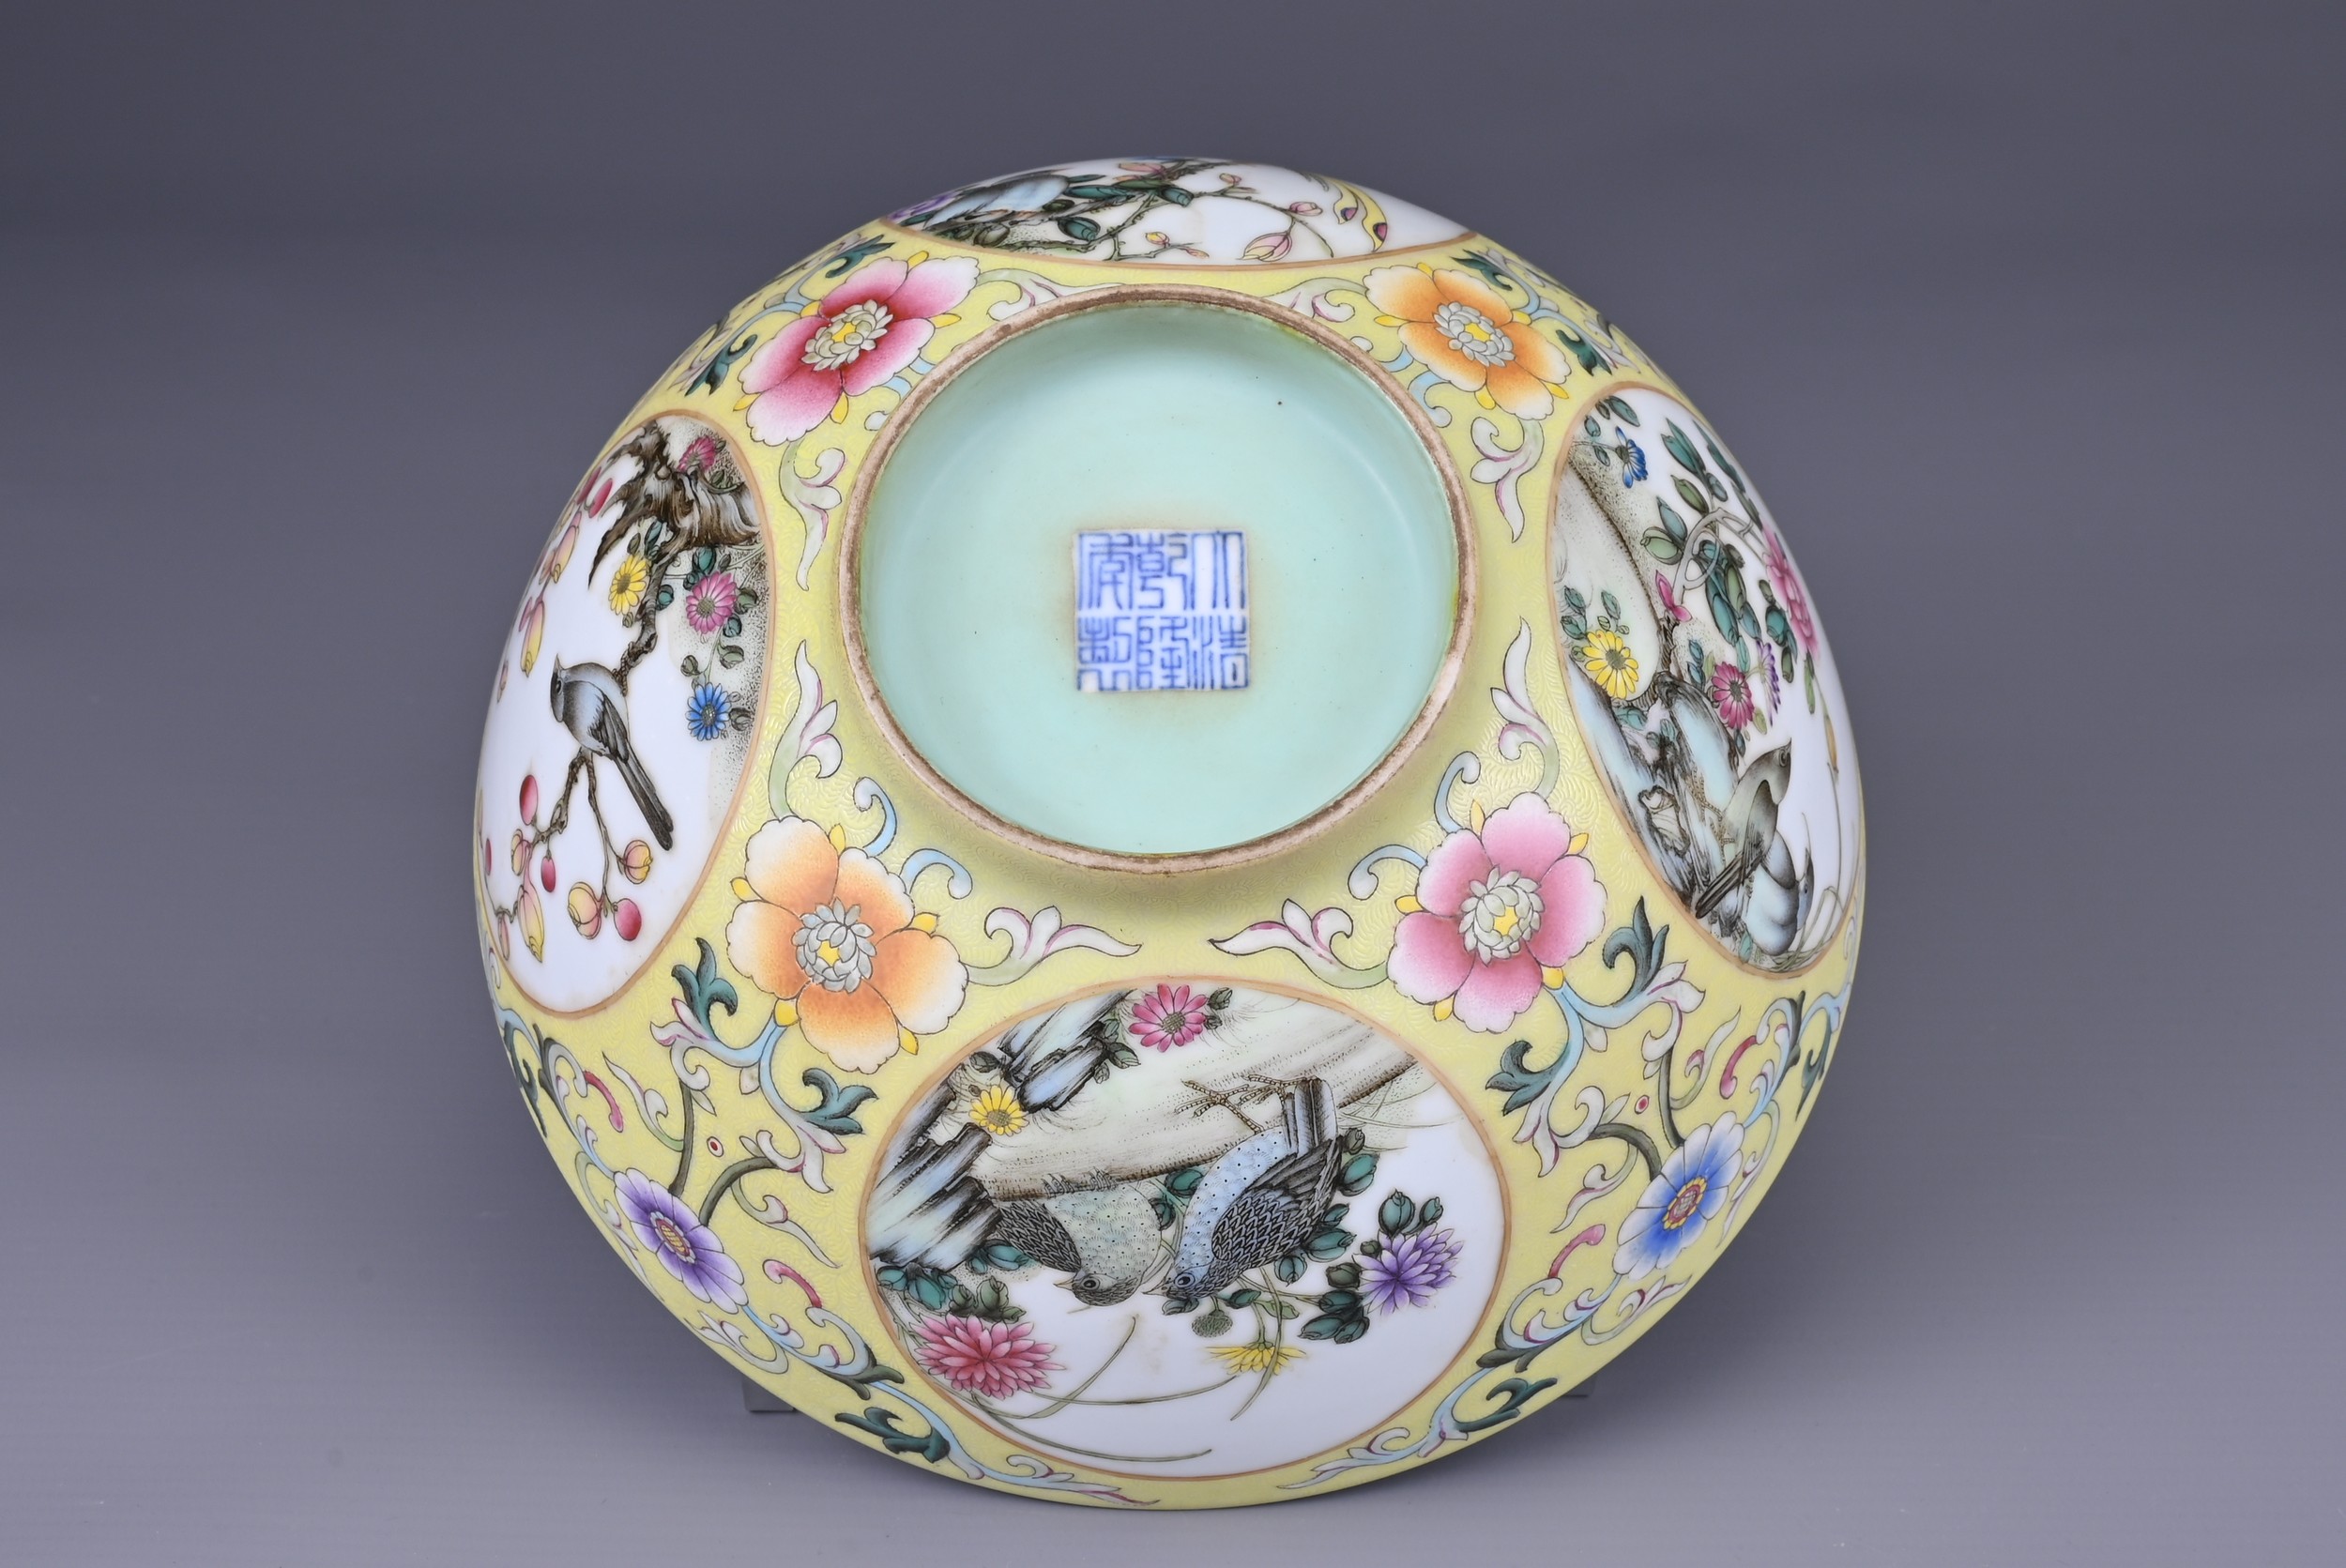 A CHINESE PORCELAIN FAMILLE ROSE AND YELLOW-GROUND SGRAFFITO BOWL, 20TH CENTURY. With underglaze - Image 4 of 6